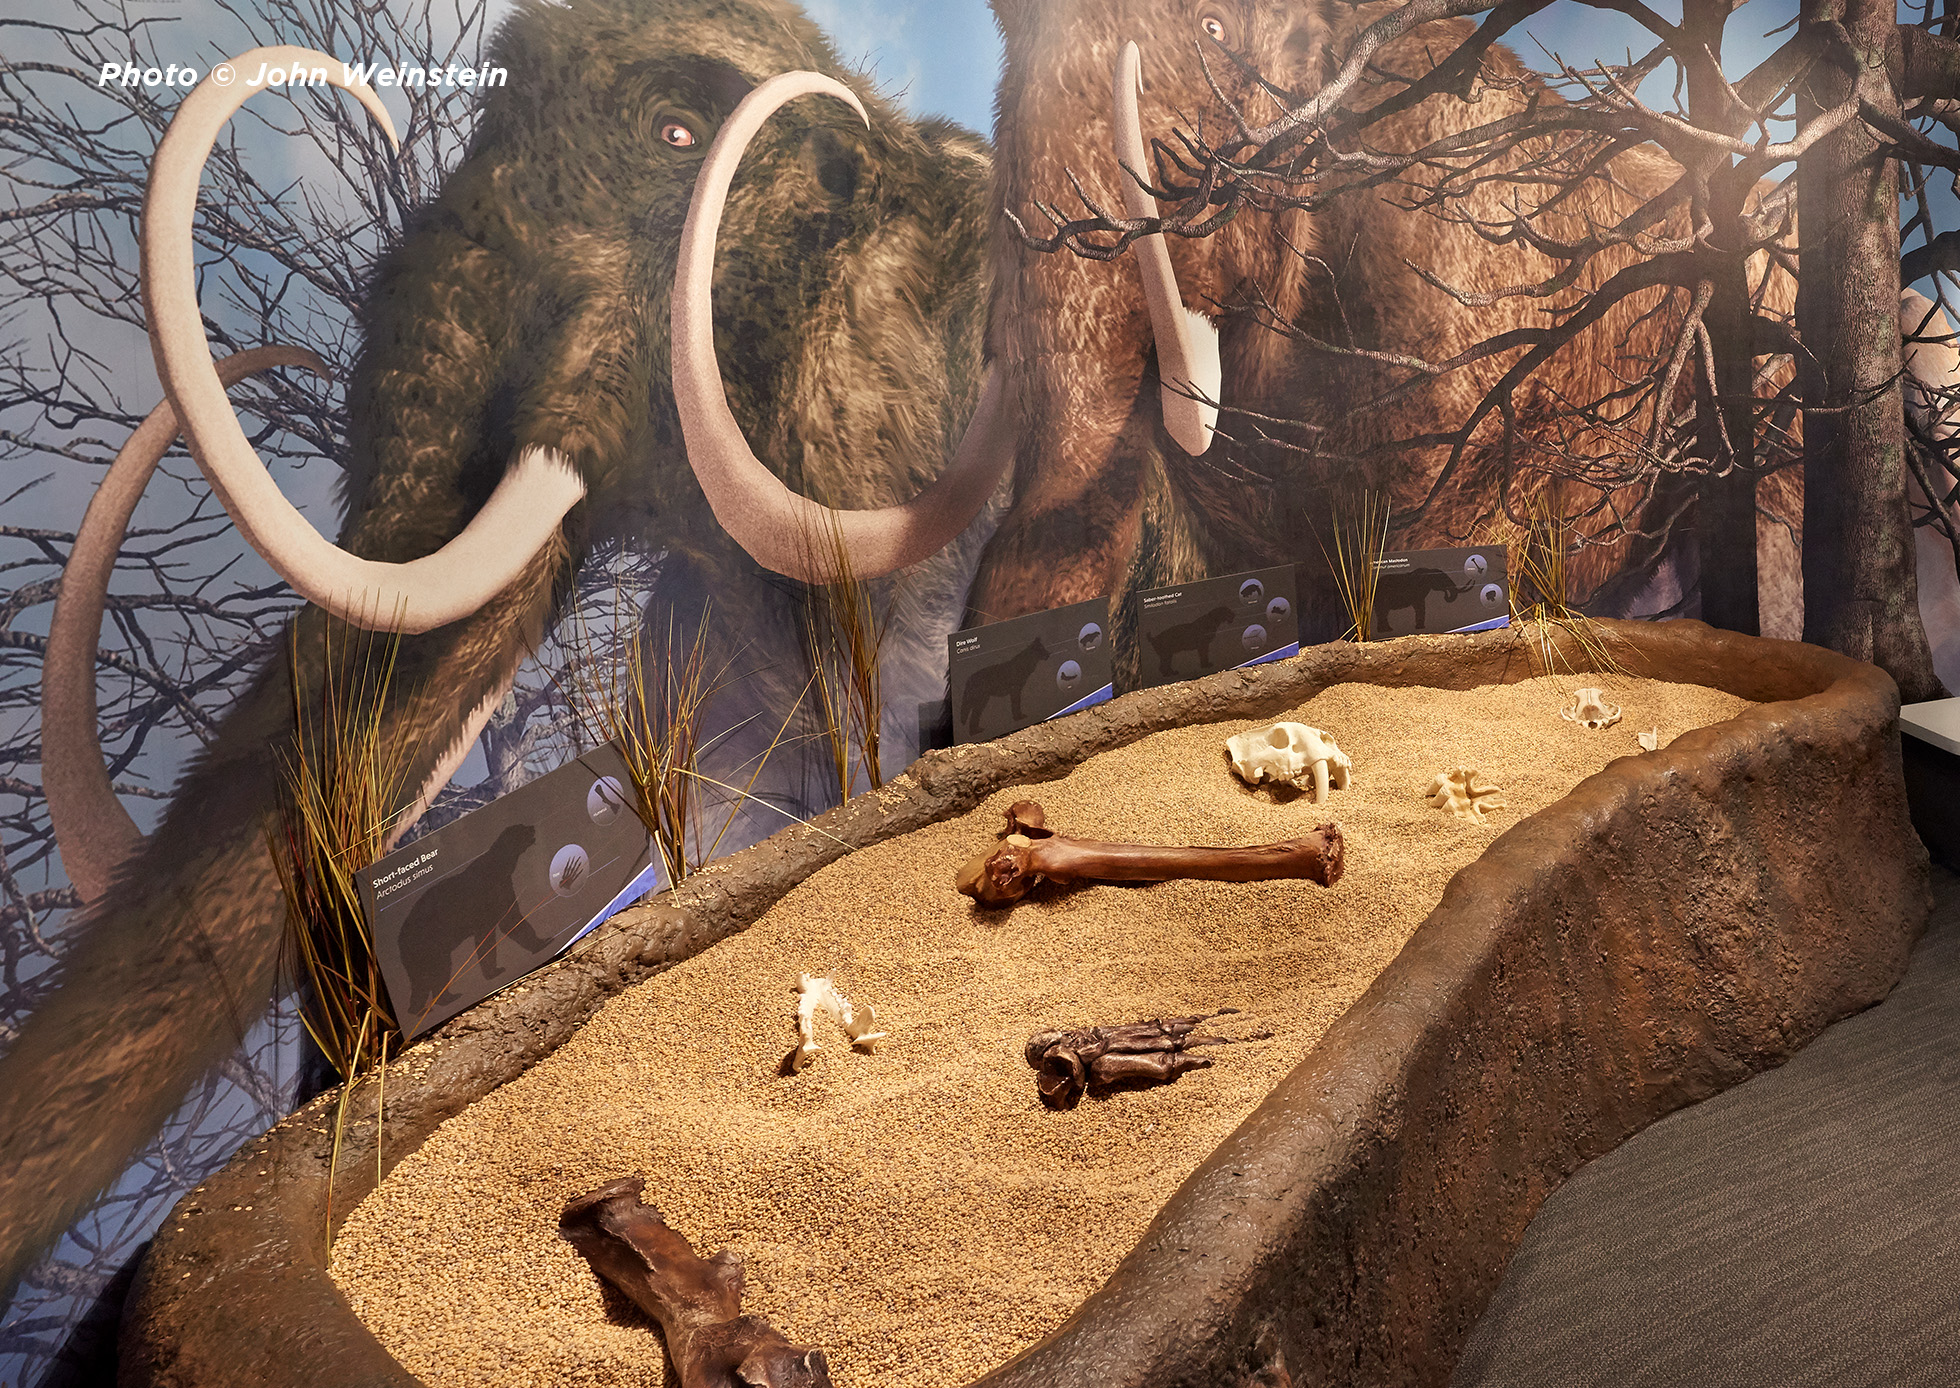 Photo of IceAge Woolly Mammoth standing in front of some animal bones.